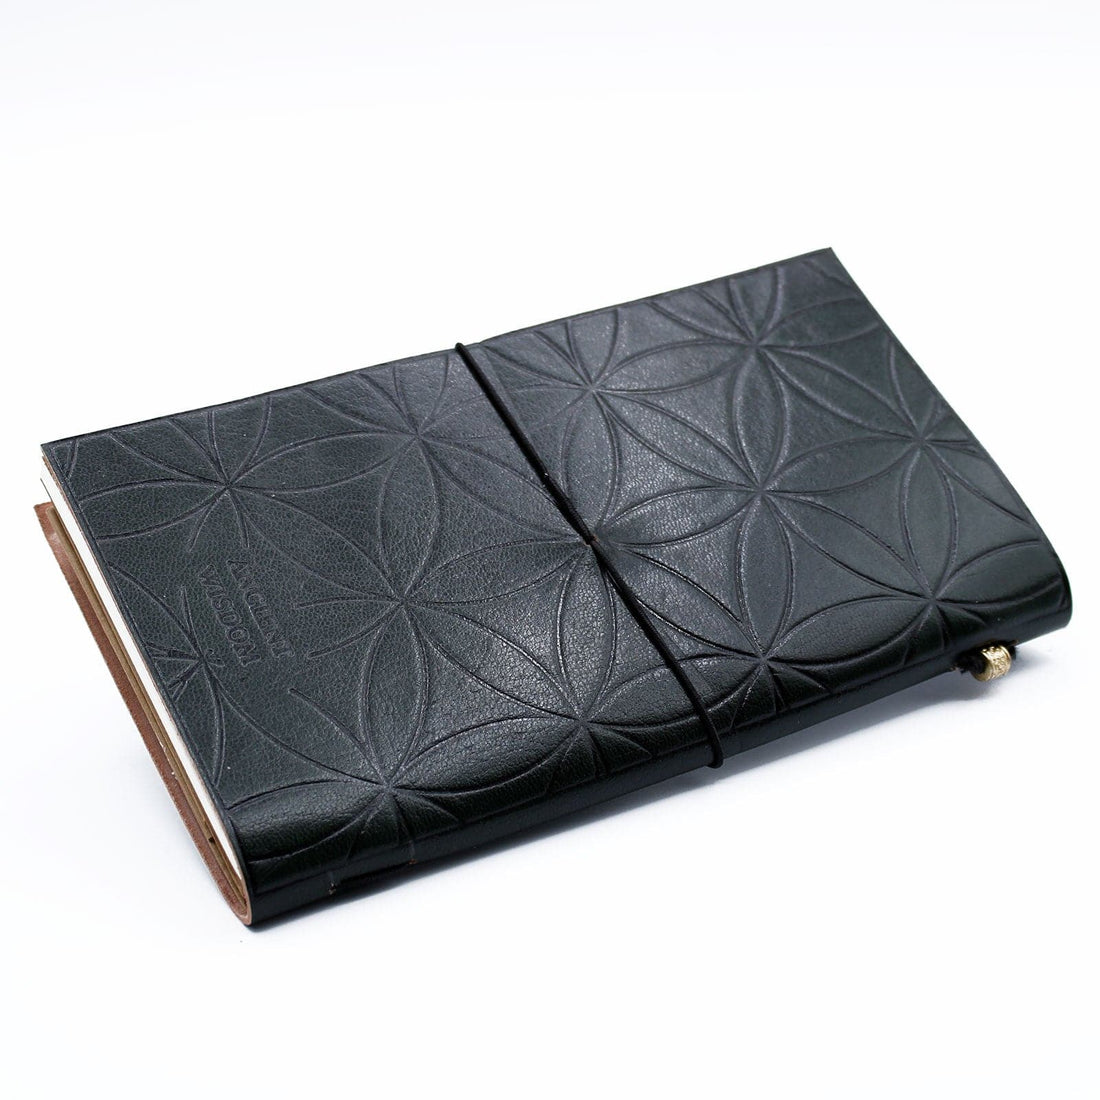 Handmade Leather Journal - Flower of Life - Green (80 pages) - best price from Maltashopper.com MSJ-06